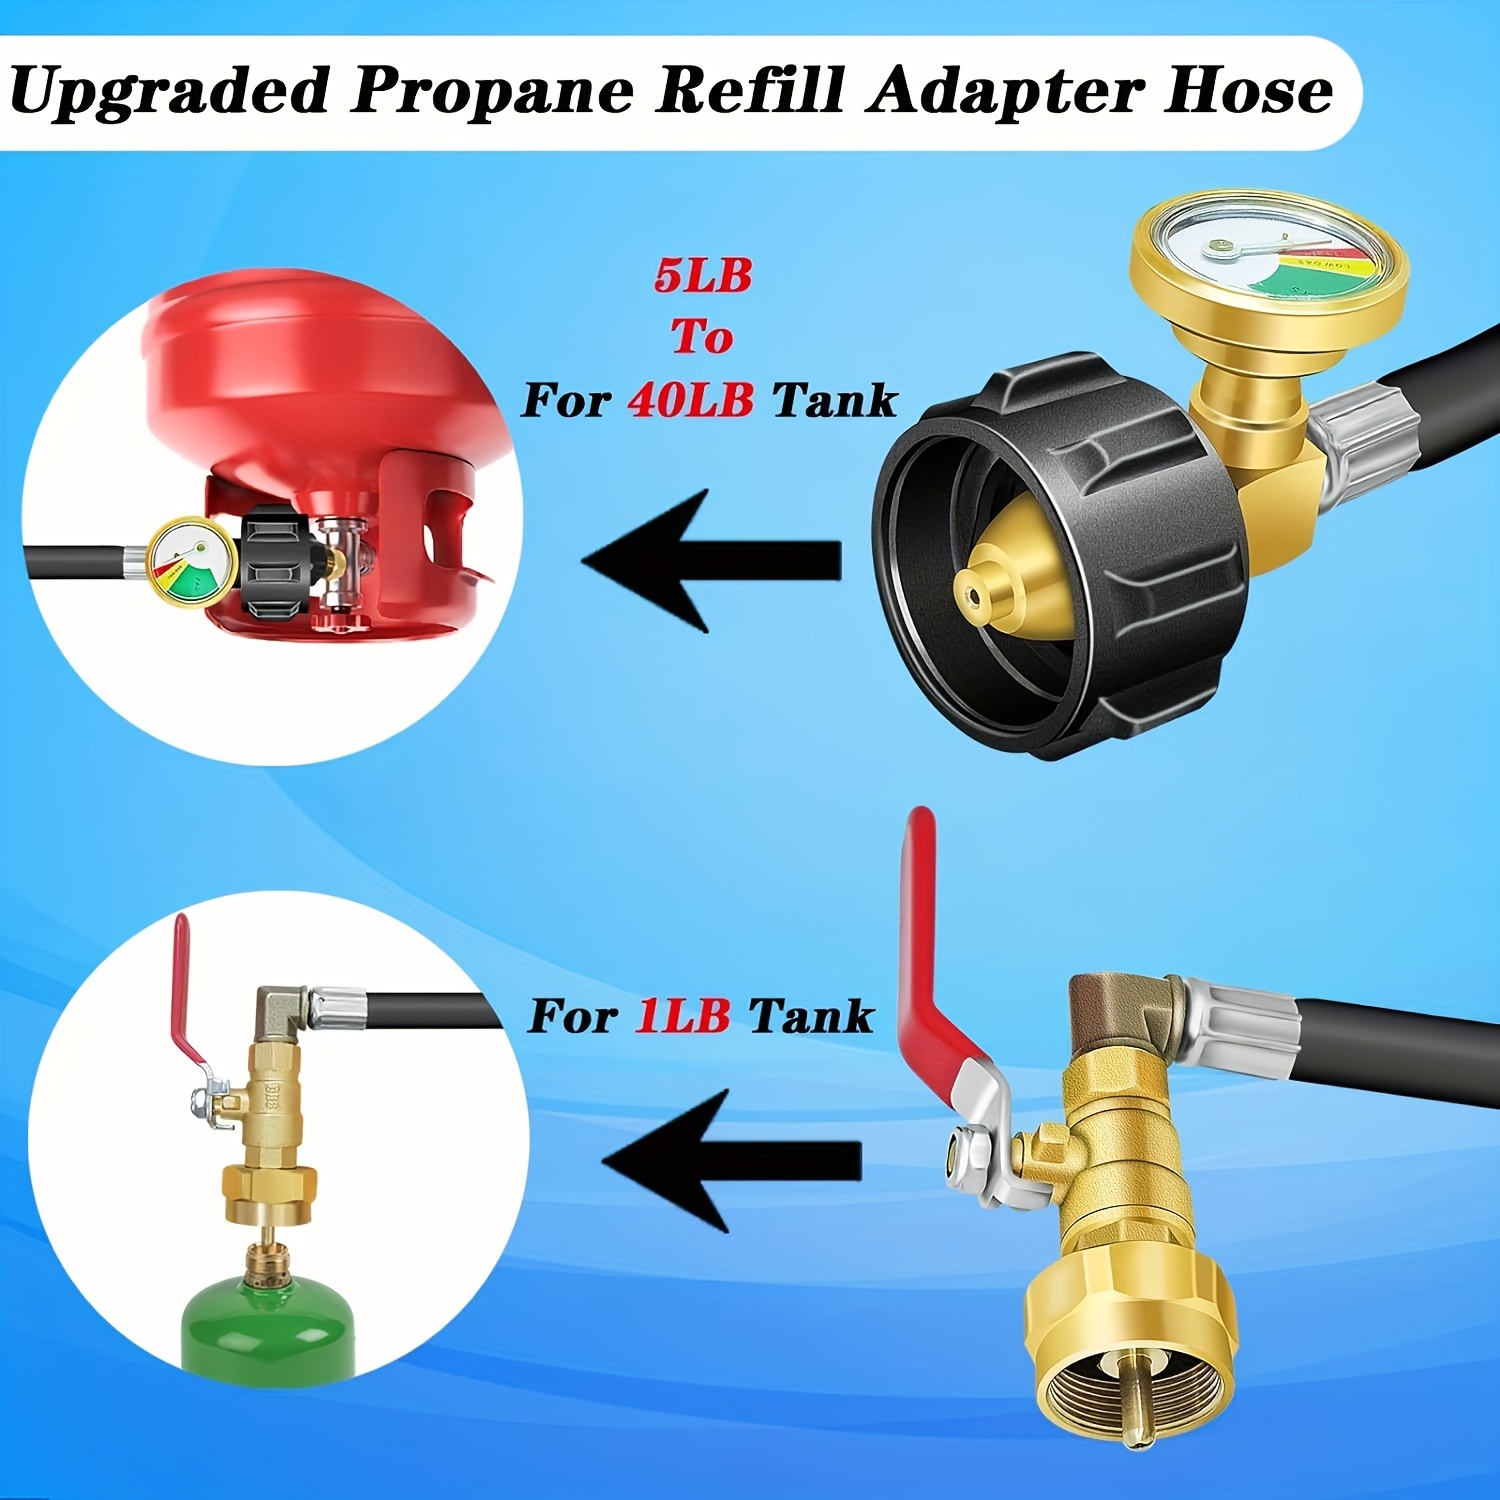 3 feet propane refill adapter hose with gauge and on off control valve extension propane refill hose fill 1 pound bottles from 20lb tank